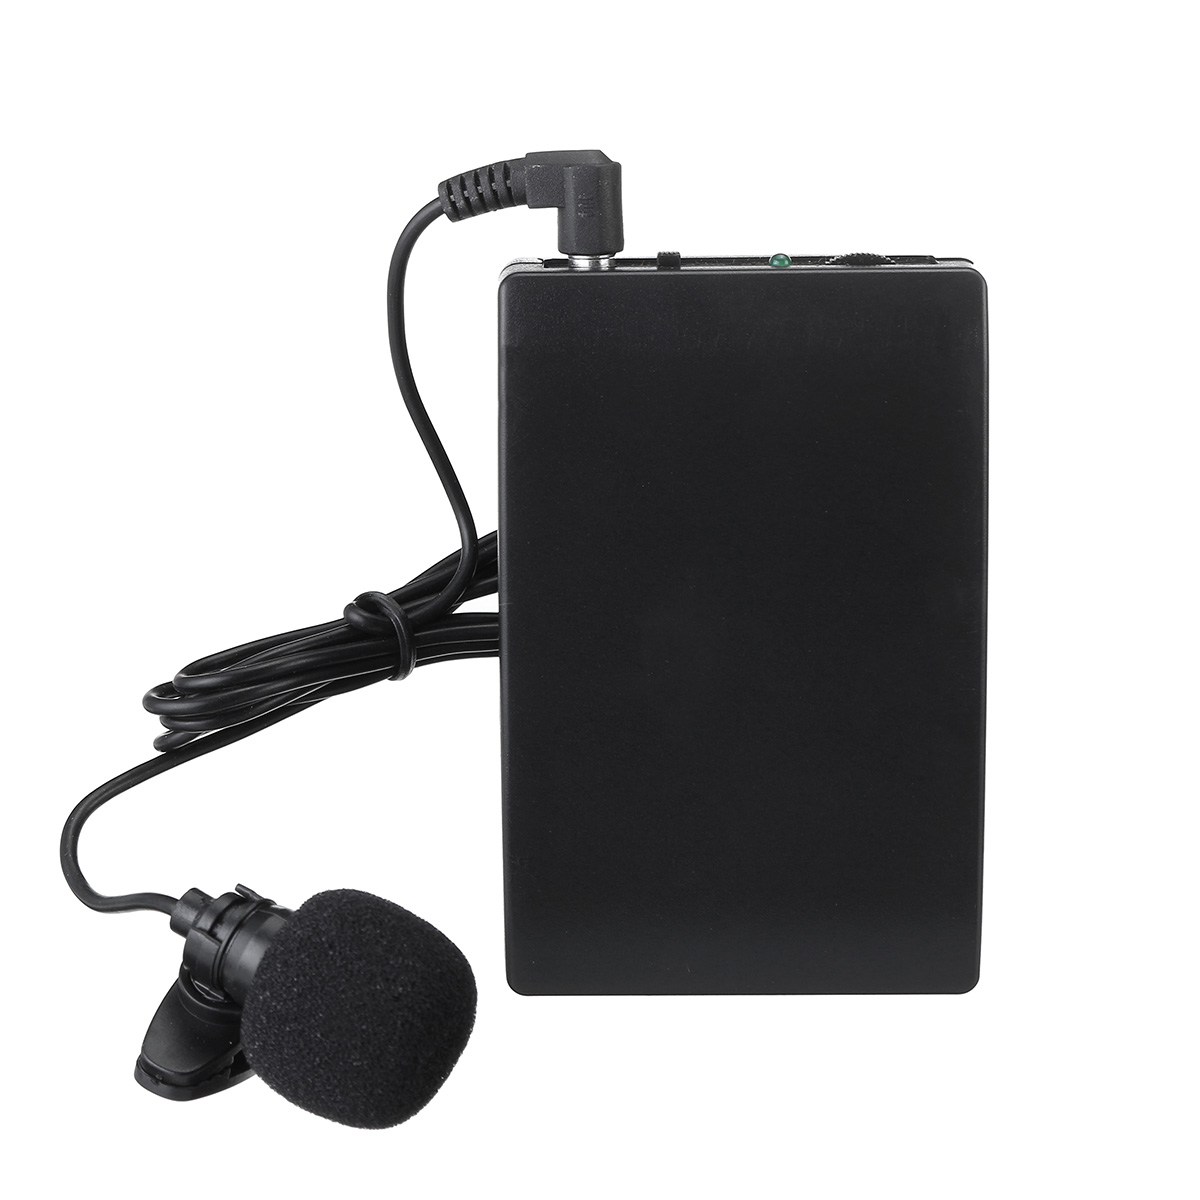 Mini-Wireless-Cordless-Clip-on-Lapel-Tie-Microphone-Mic-Transmitter-Set-for-Teacher-Lecturer-Office--1665388